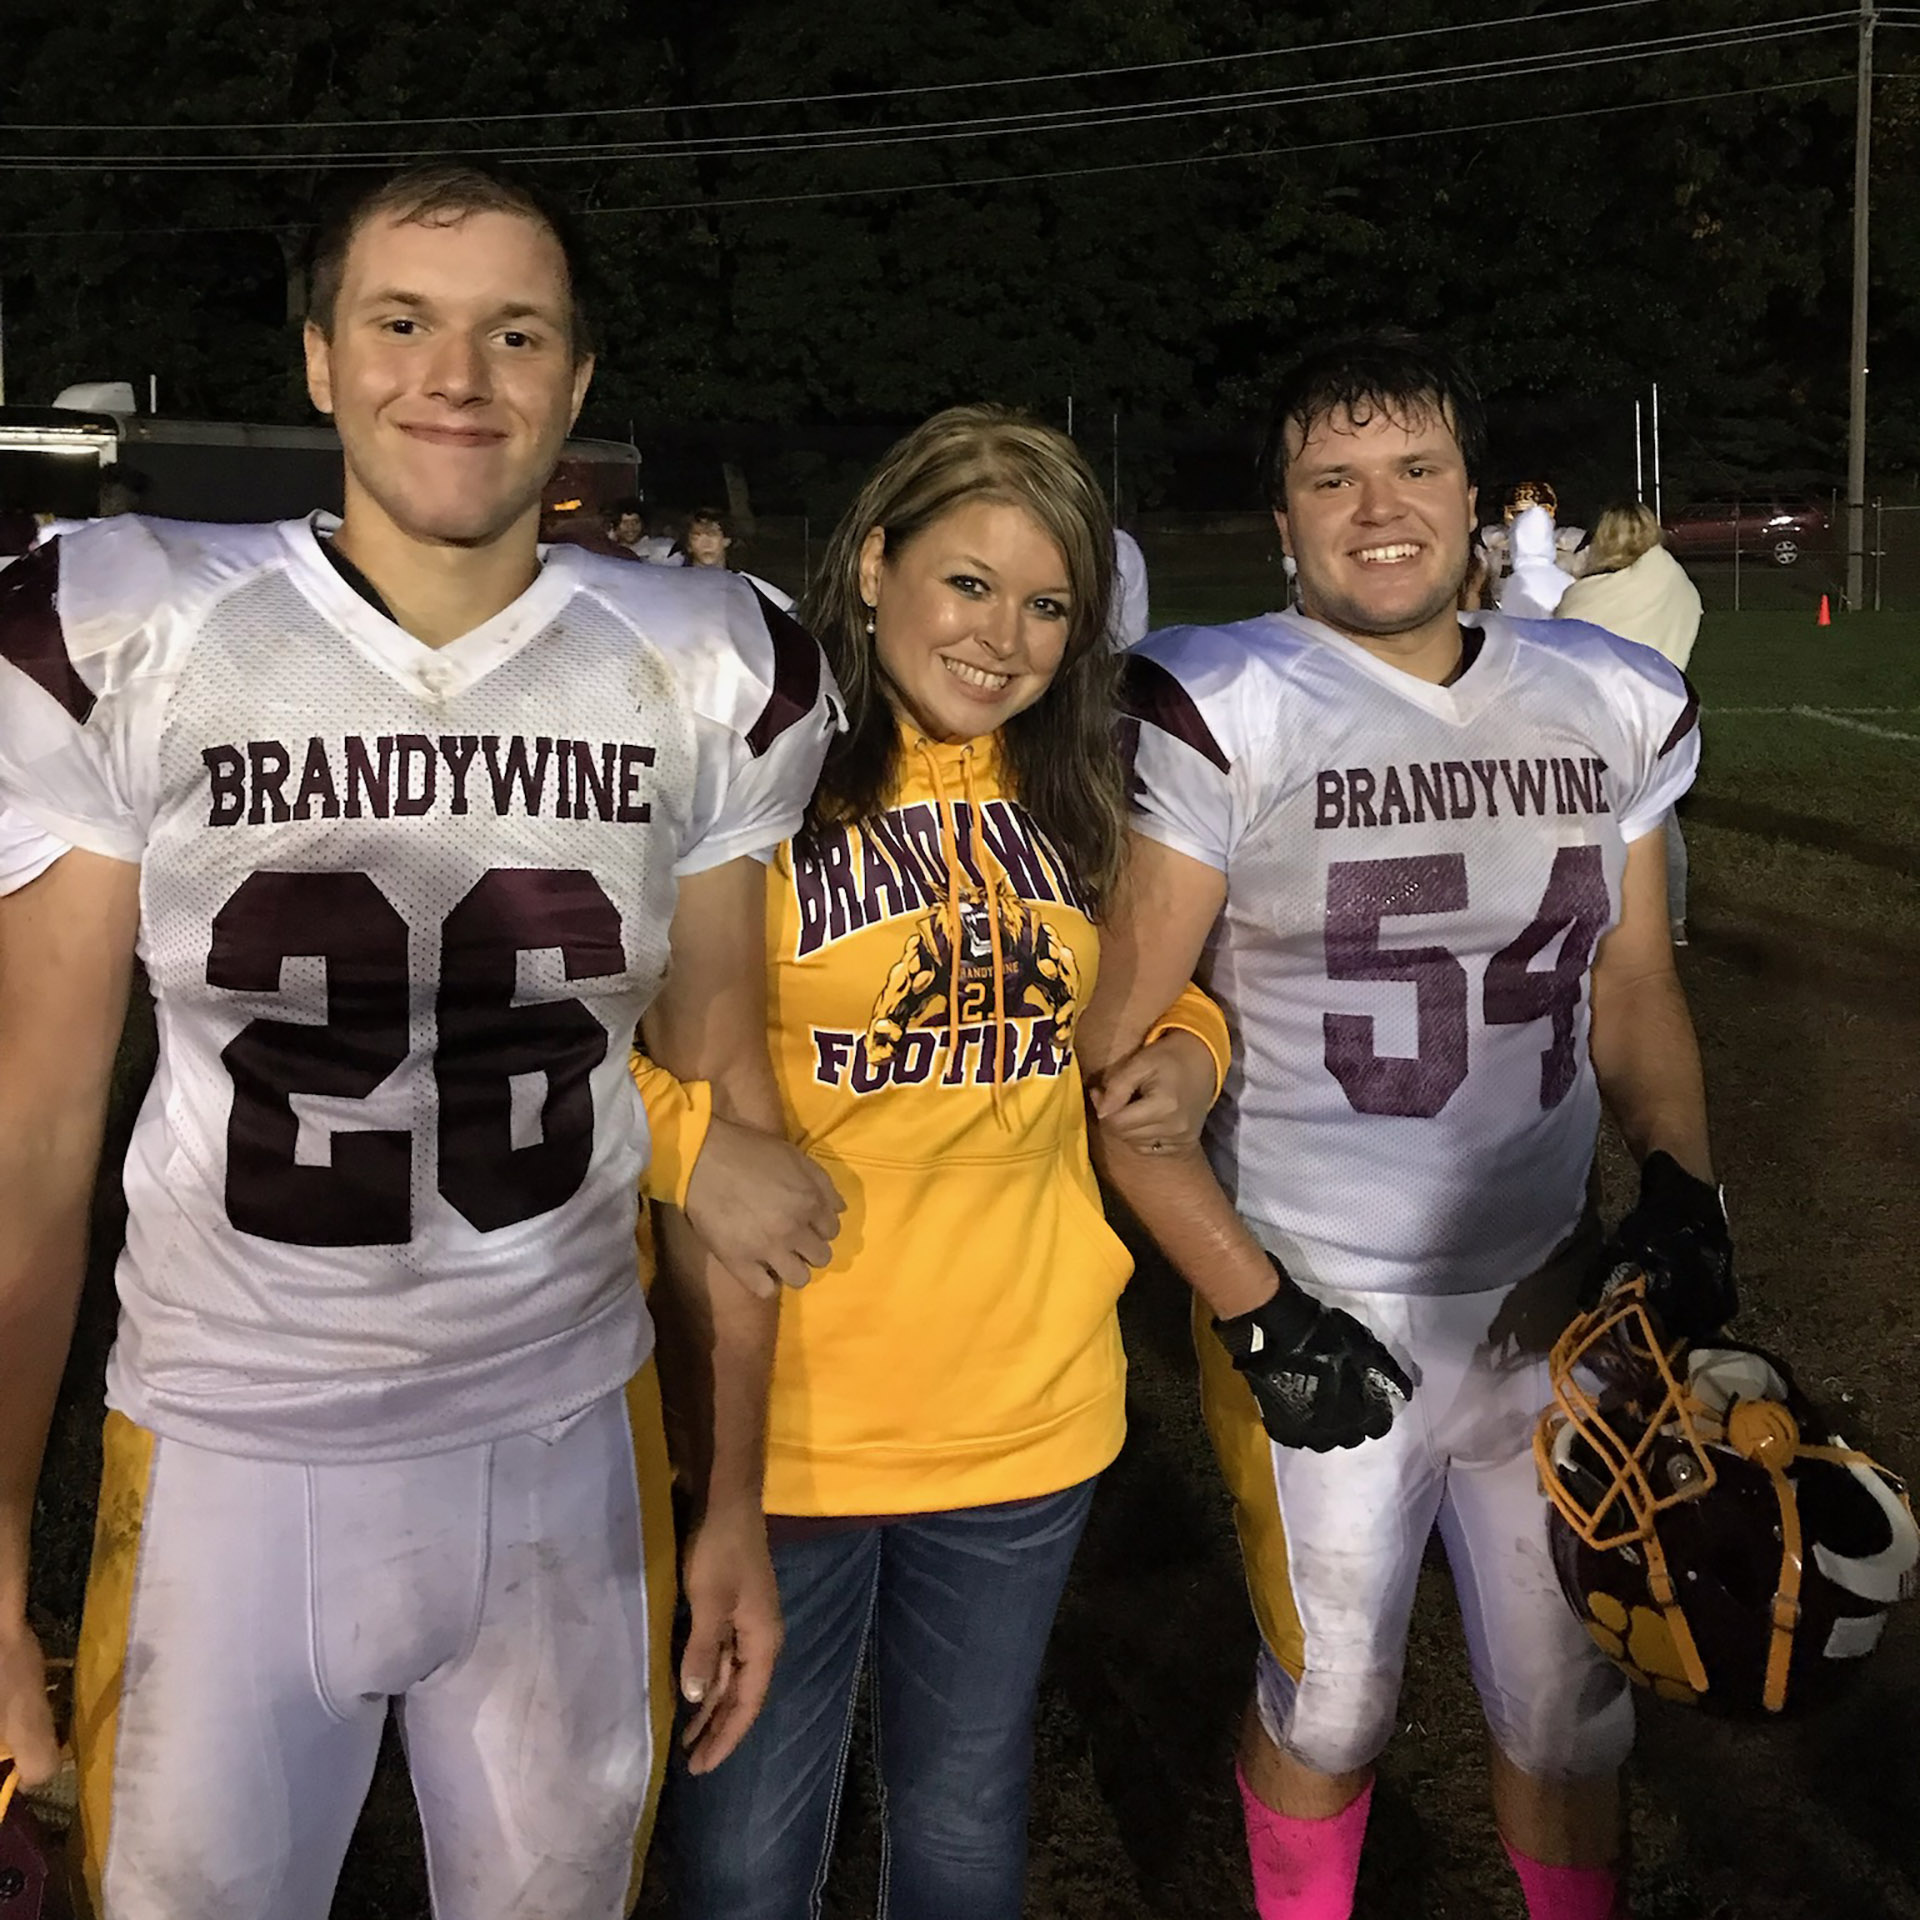 Her sons played football for the Bobcats